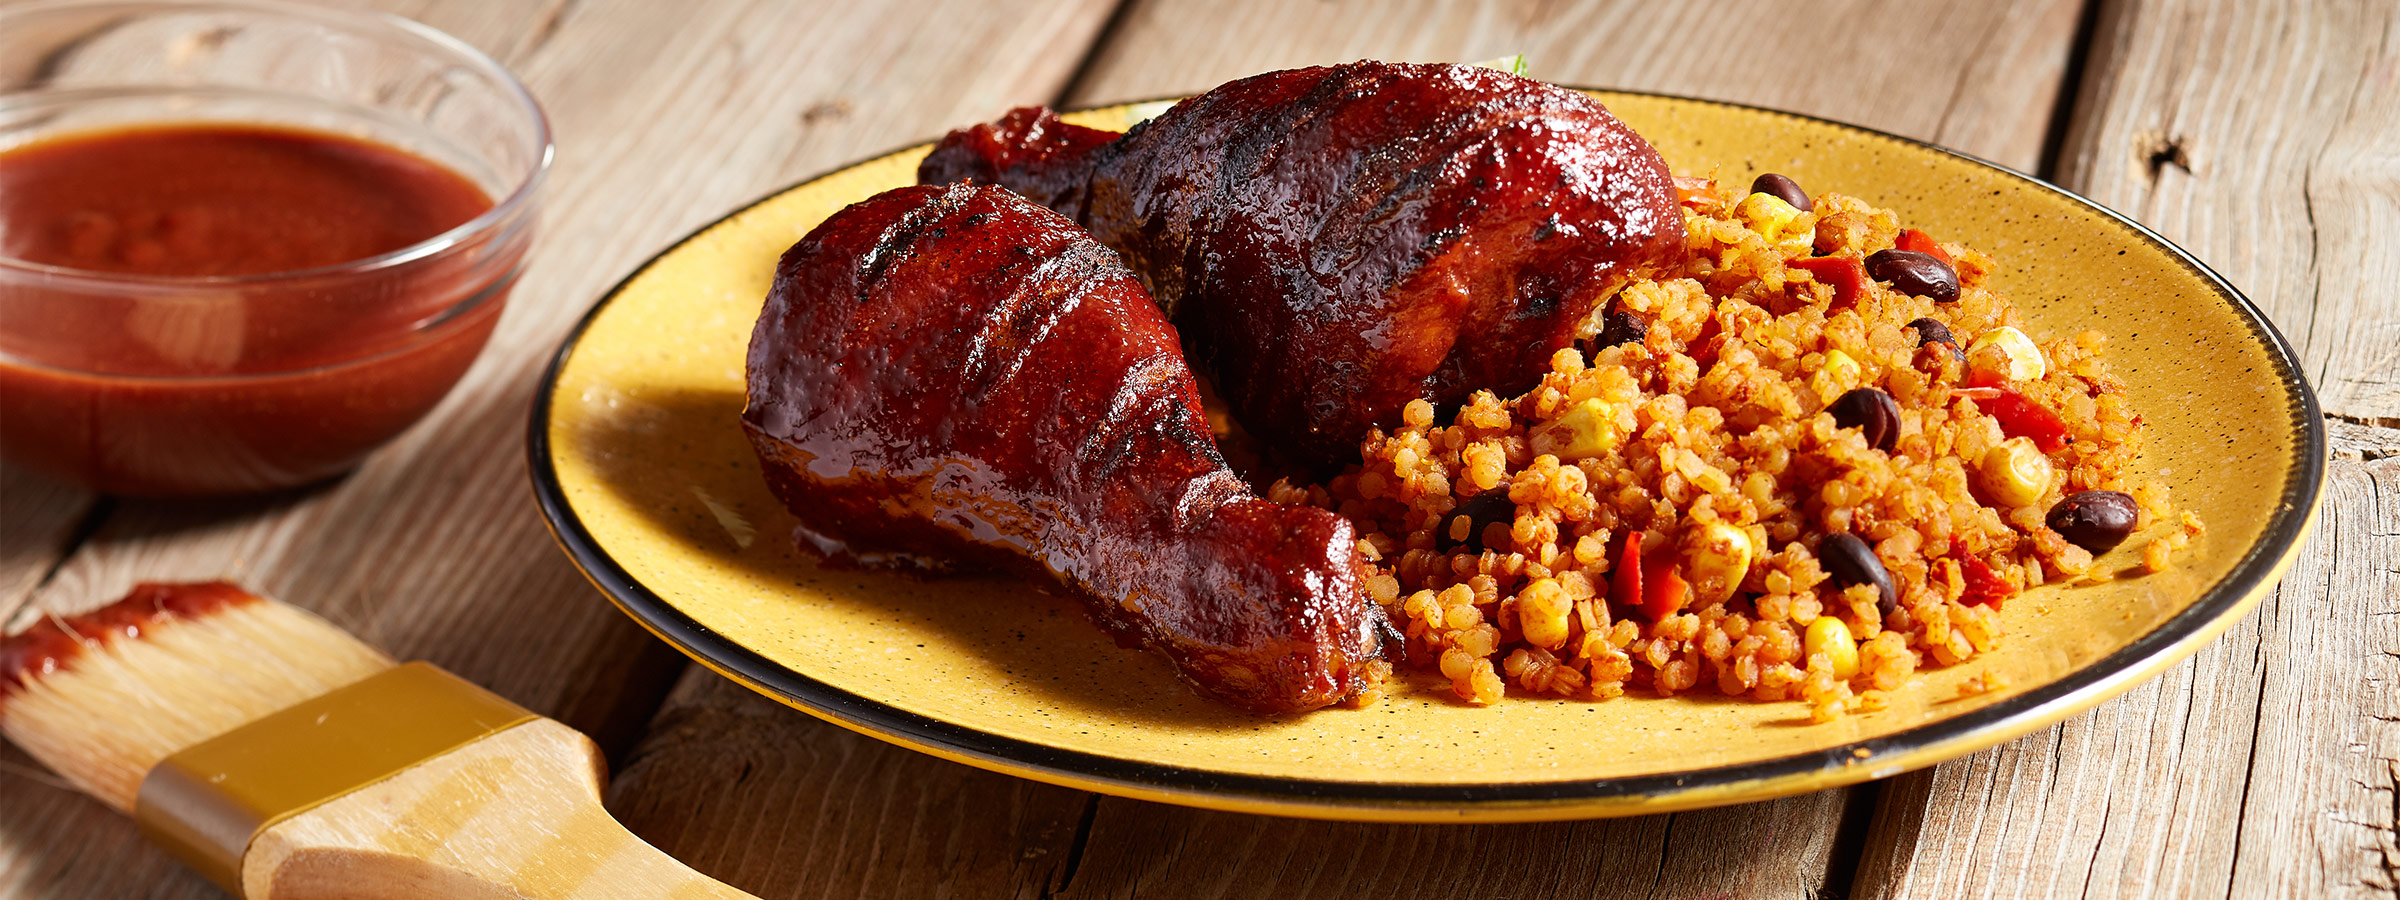 A yellow plate on a table holds servings of chicken covered in Low Sugar Homemade Barbeque Sauce.